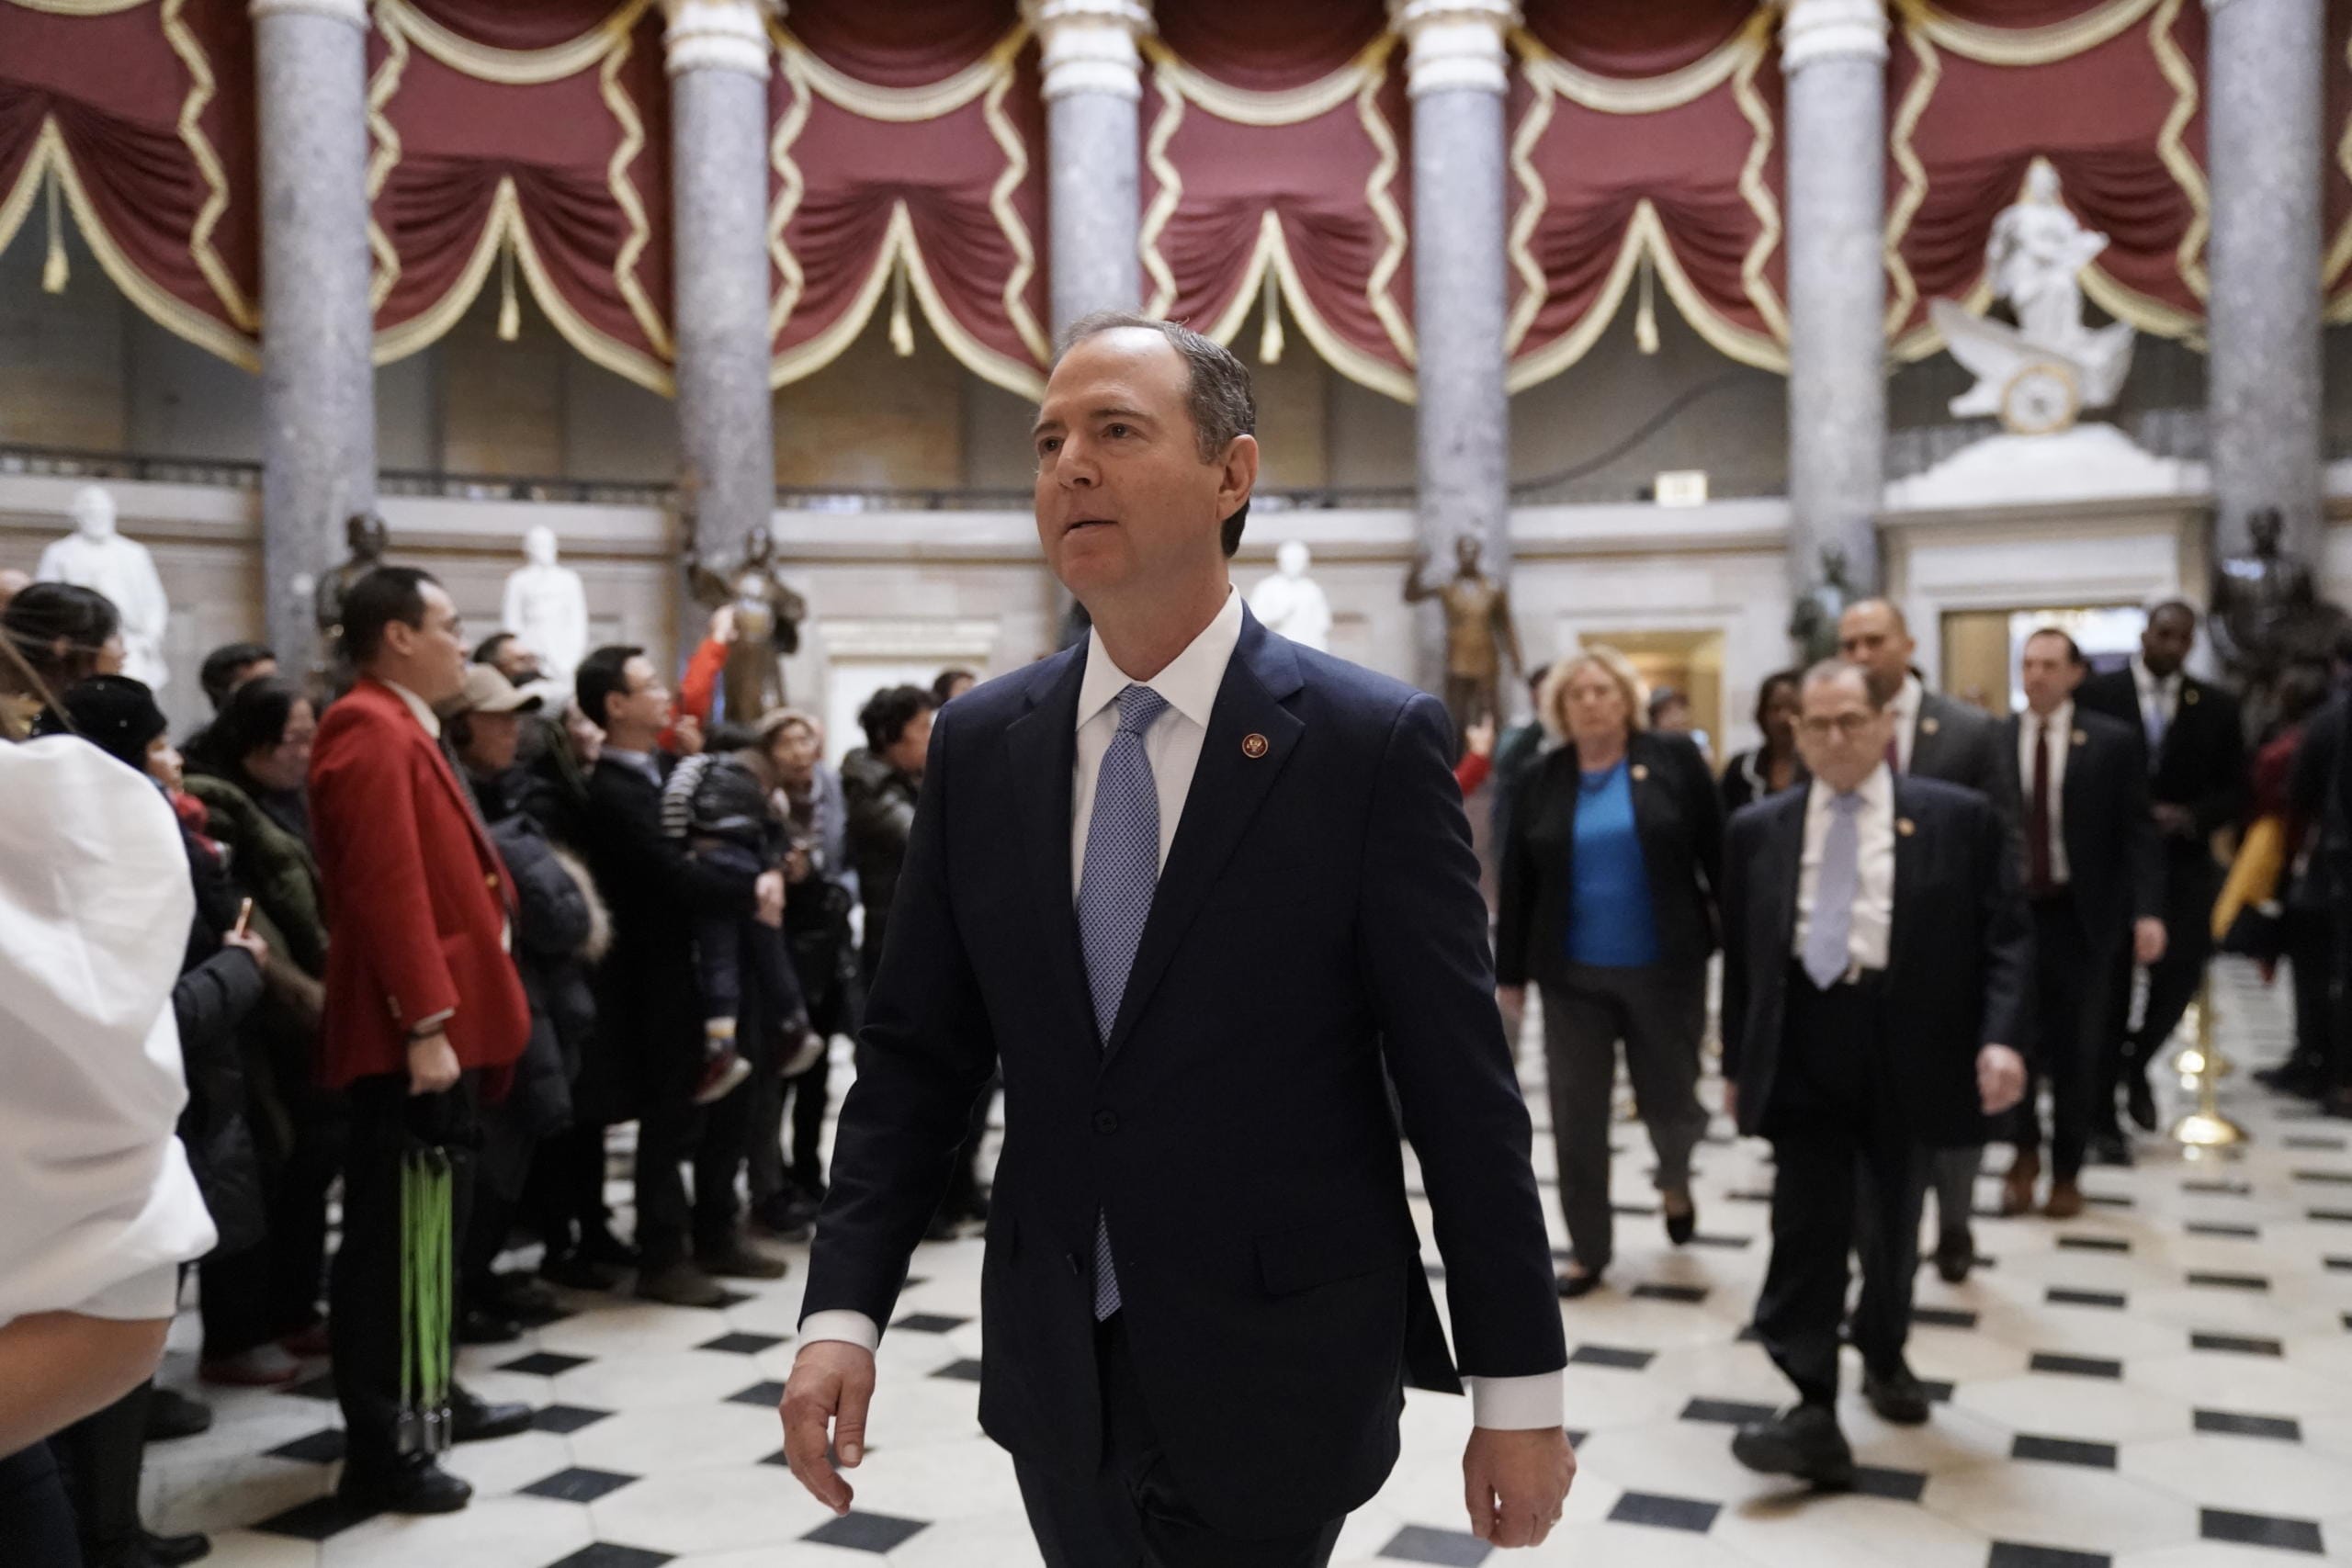 Impeachment managers, House Intelligence Committee Chairman Adam Schiff, D-Calif., front center, followed by House Judiciary Committee Chairman, Rep. Jerrold Nadler, D-N.Y., right, and others, walk to a press conference at the Capitol in Washington, Tuesday, Jan. 21, 2020. Others are Rep. Hakeem Jeffries, D-N.Y., Rep. Sylvia Garcia, D-Texas, Rep. Val Demings, D-Fla., Rep. Zoe Lofgren, D-Calif., and Rep. Jason Crow, D-Colo. (AP Photo/J.